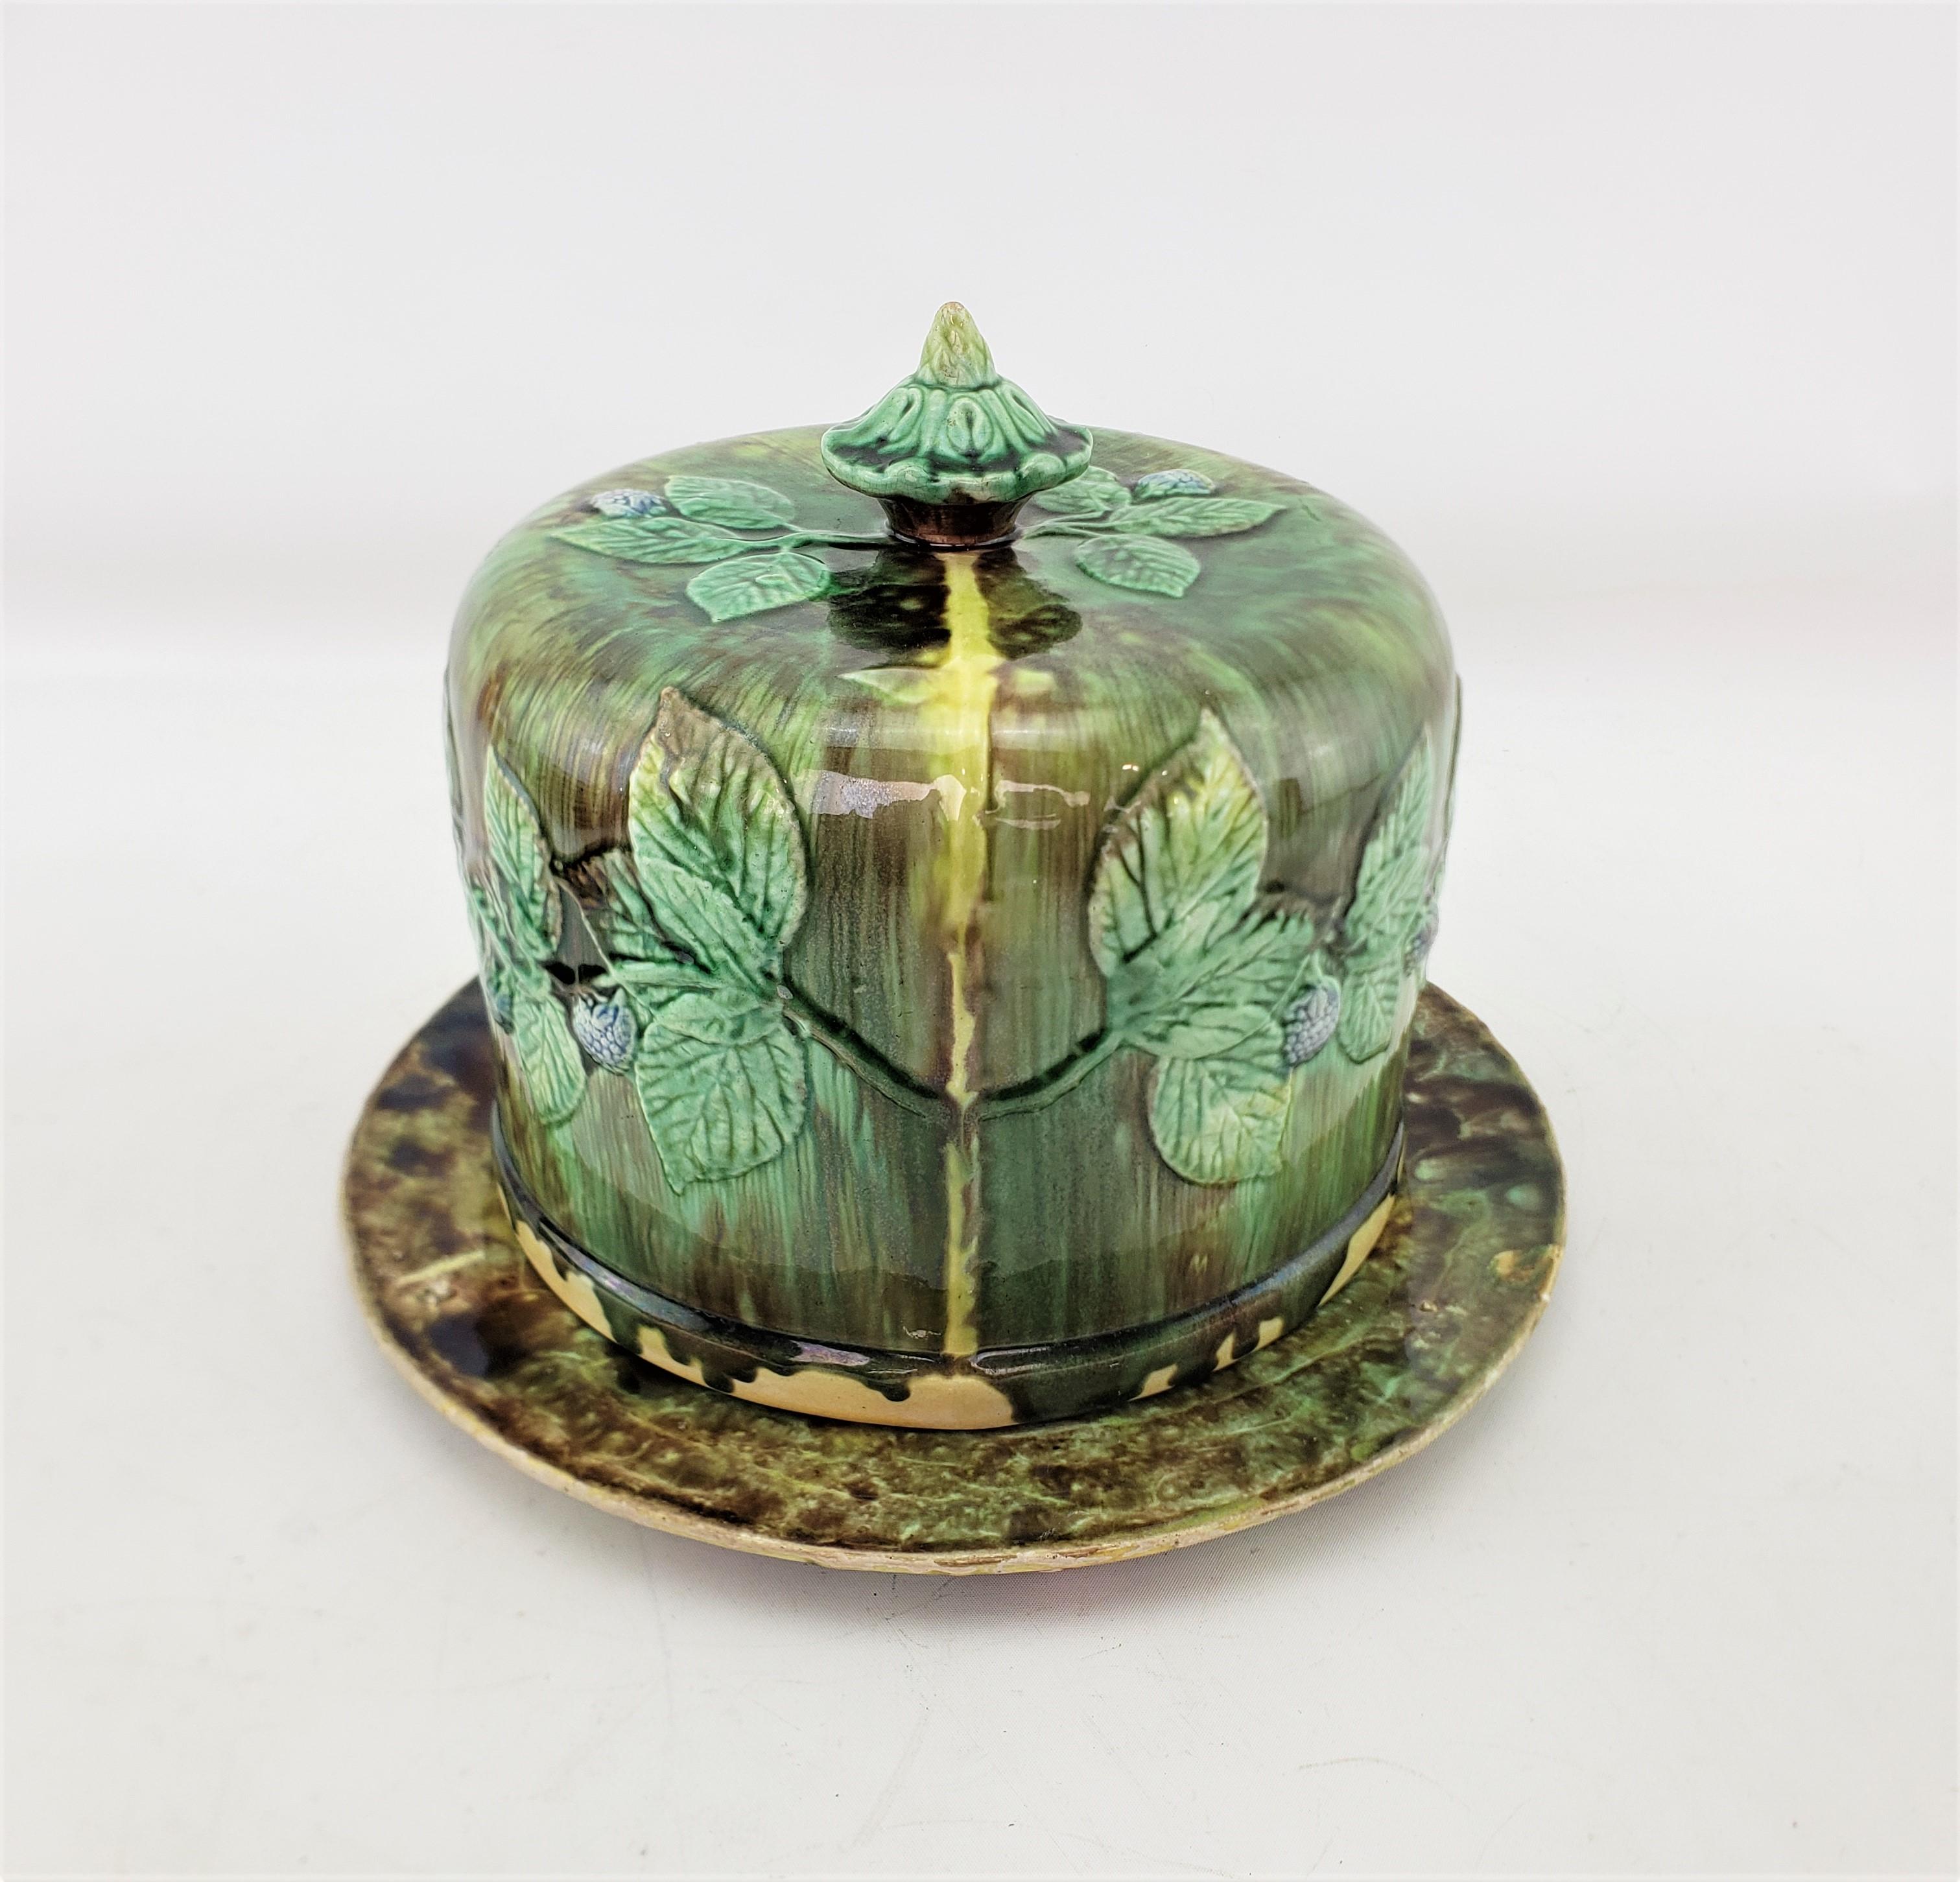 Large Antique Majolica Covered Cheese Server or Dome with Leaf & Berry Decor For Sale 1